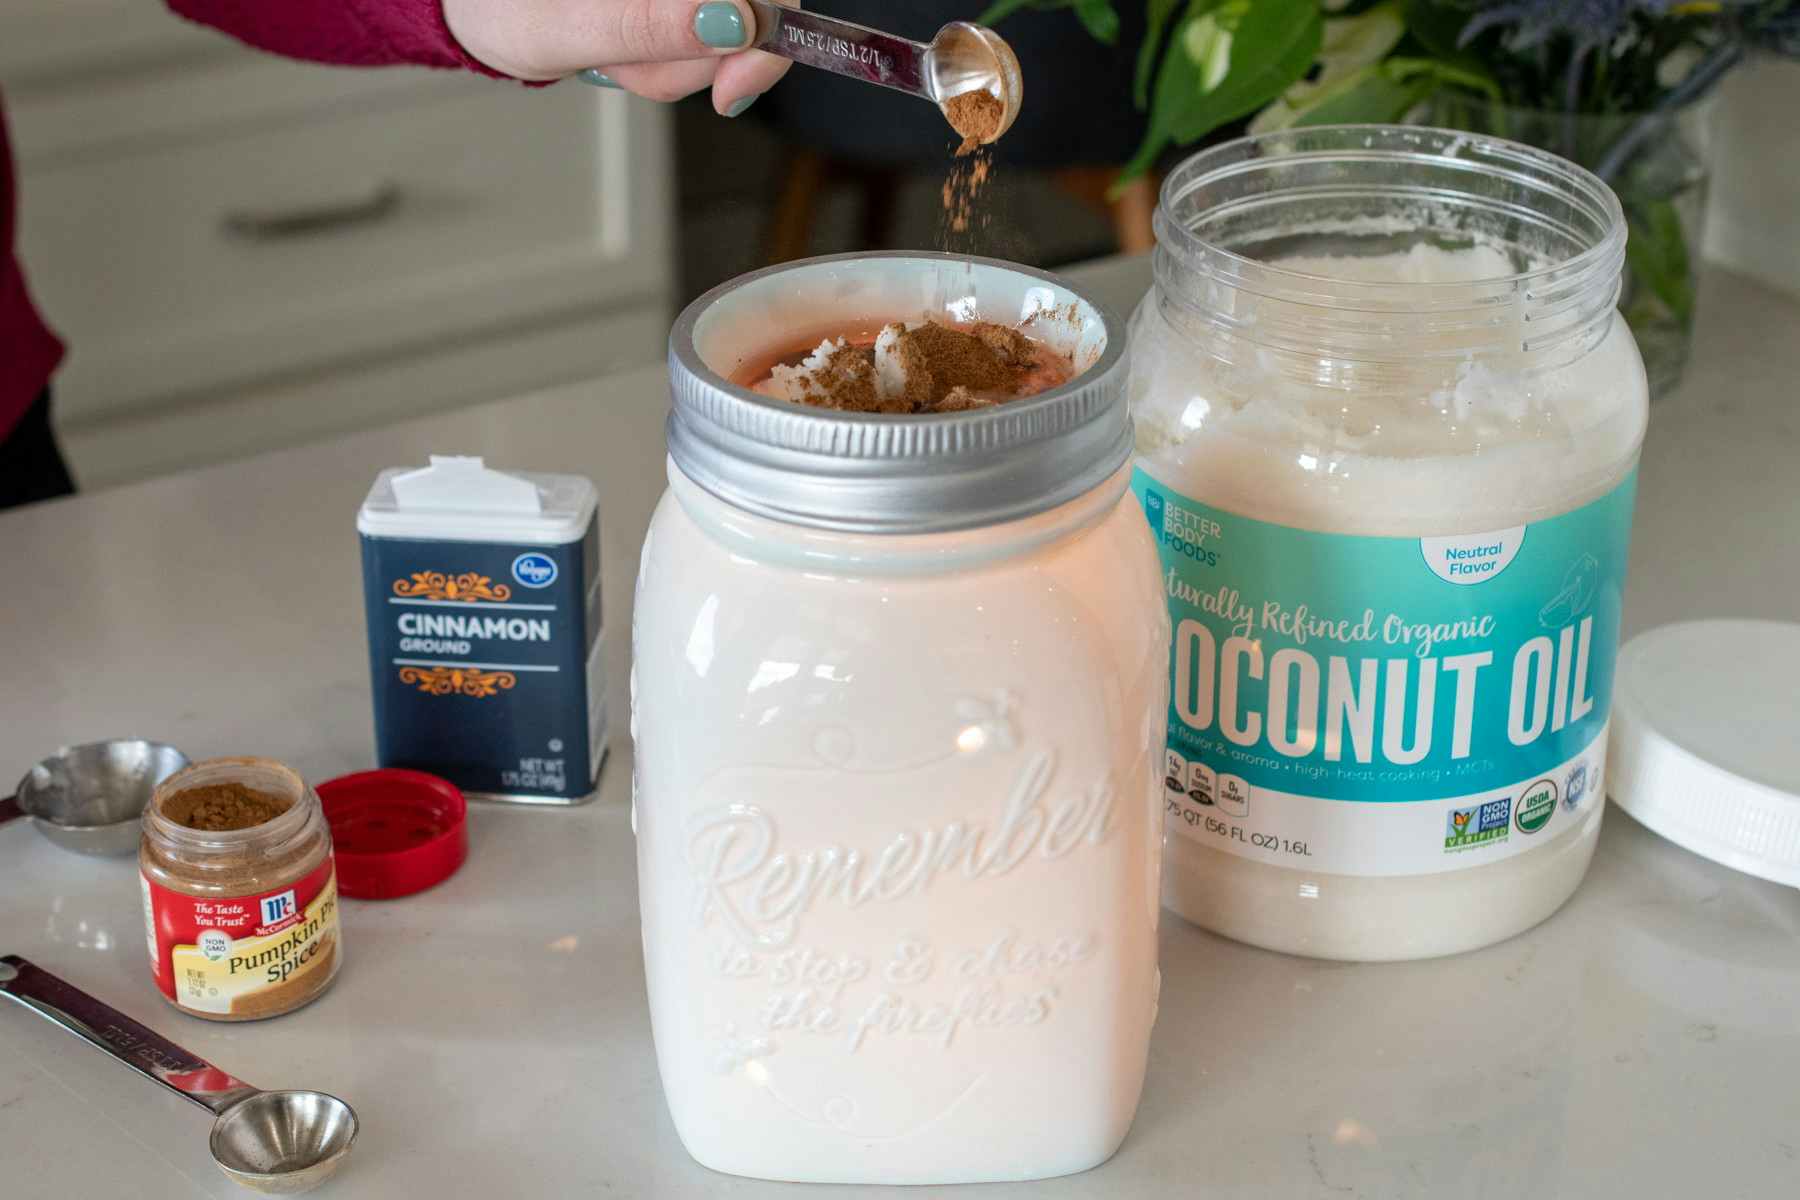 Someone adding a teaspoon of cinnamon to a candle warmer with coconut oil nearby